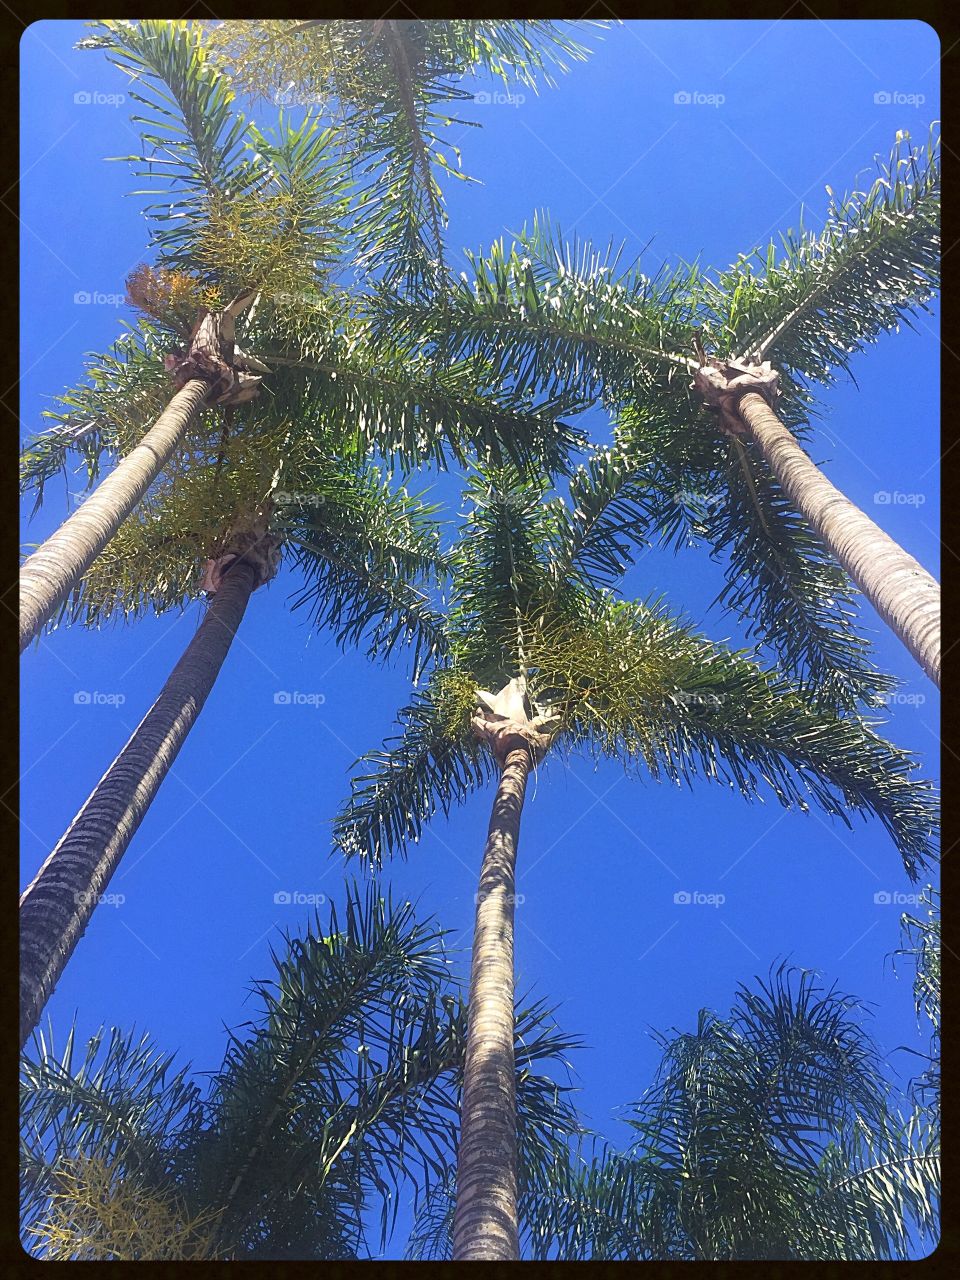 Palms getting the sky!!